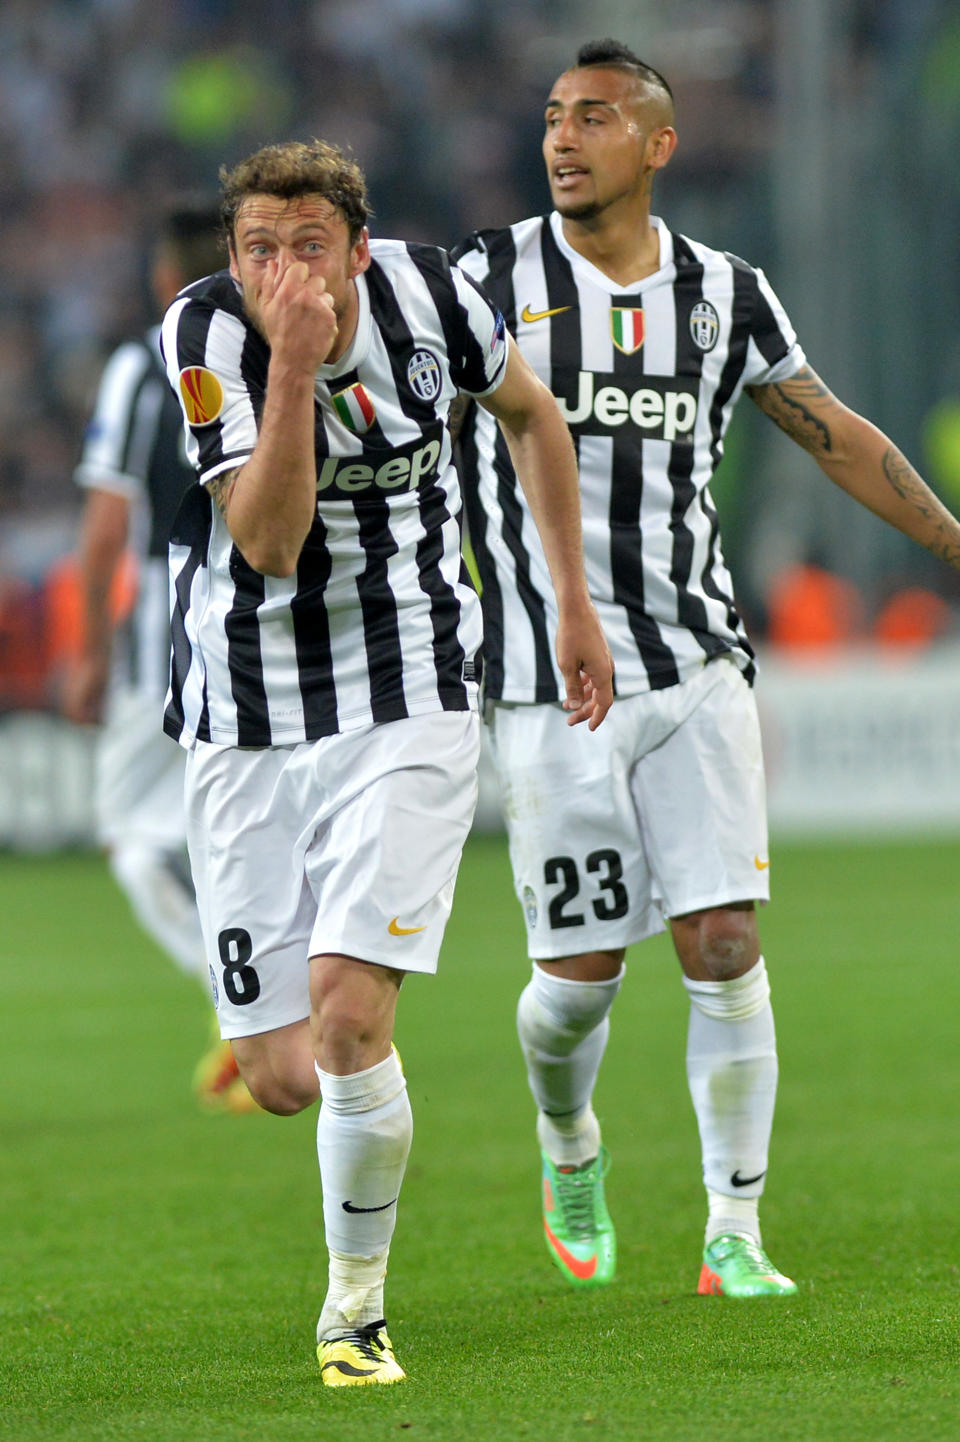 Juventus midgielder Claudio Marchisio, left, celebrates after scoring during the Europa League quarterfinal soccer match between Juventus and Olympic Lyon at the Juventus stadium, in Turin, Italy, Thursday, April 10, 2014. (AP Photo/ Massimo Pinca)